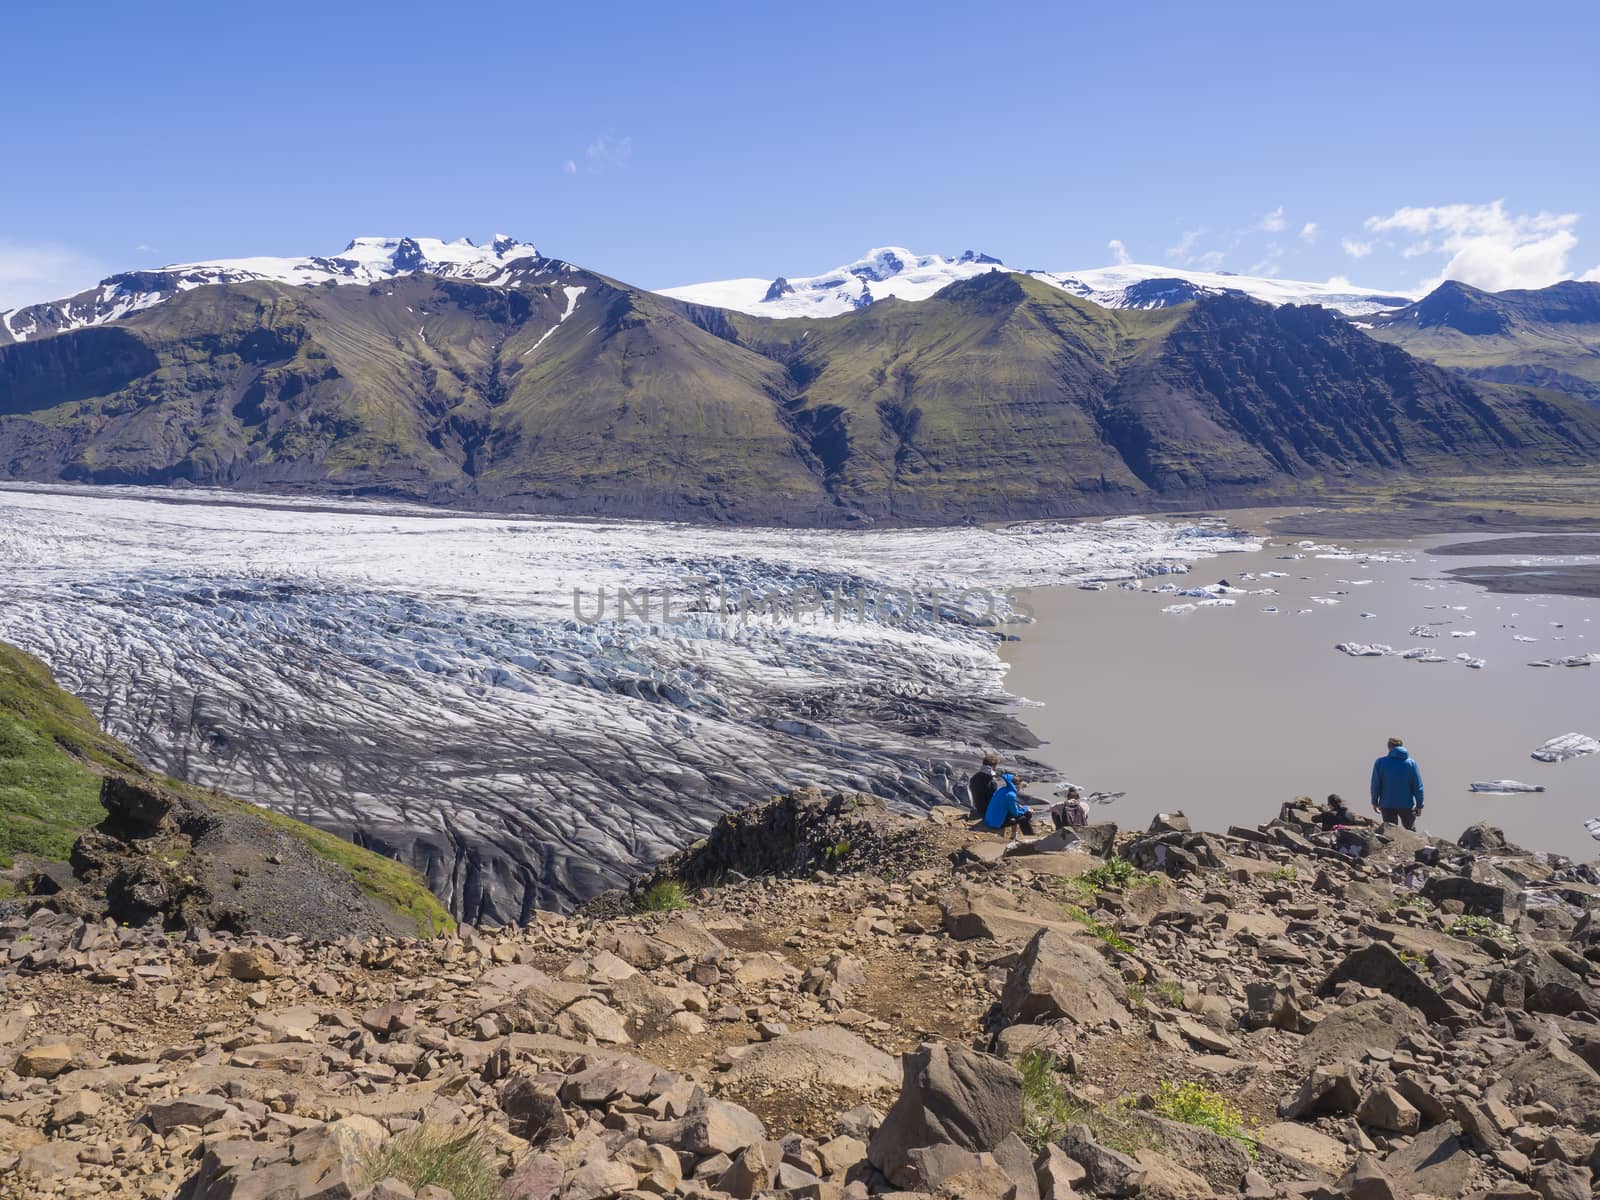 View on glacier lagoon with icebergs and tongue of Skaftafellsjokull, Vatnajokull spur, valley Morsardalur river and colorful rhyolit mountains in Skaftafell national park, Iceland